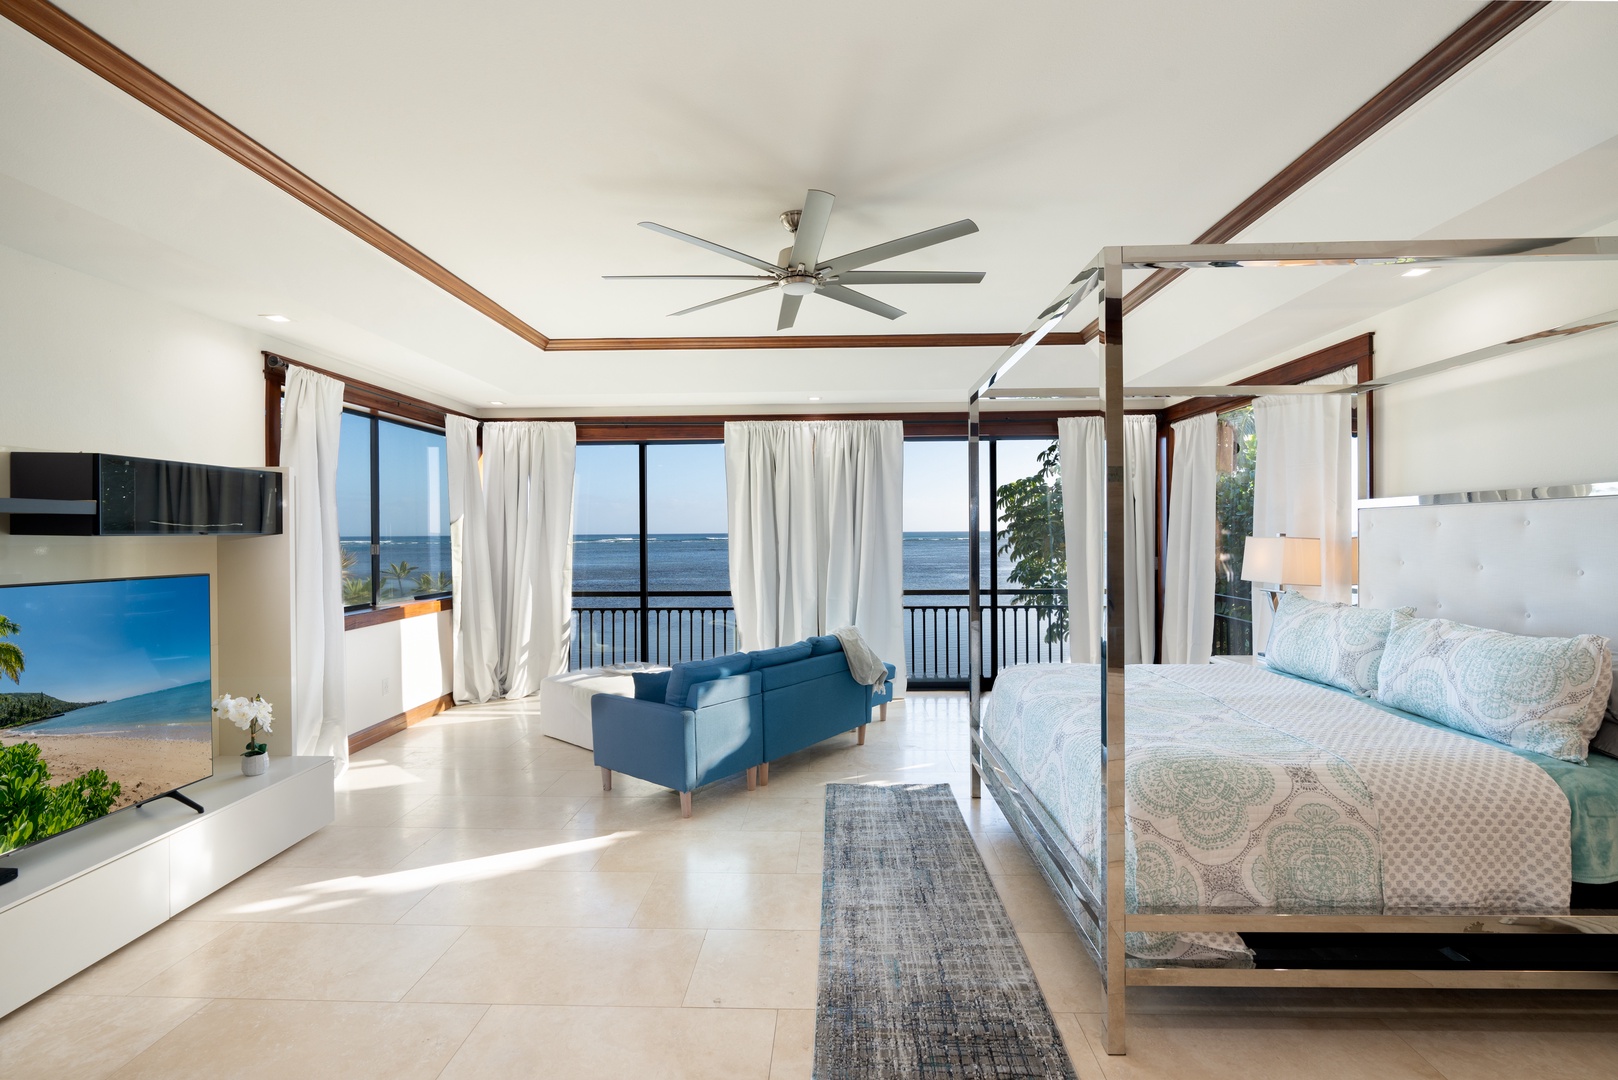 Honolulu Vacation Rentals, Wailupe Seaside - The primary suite has walls of windows with seating to enjoy the view.